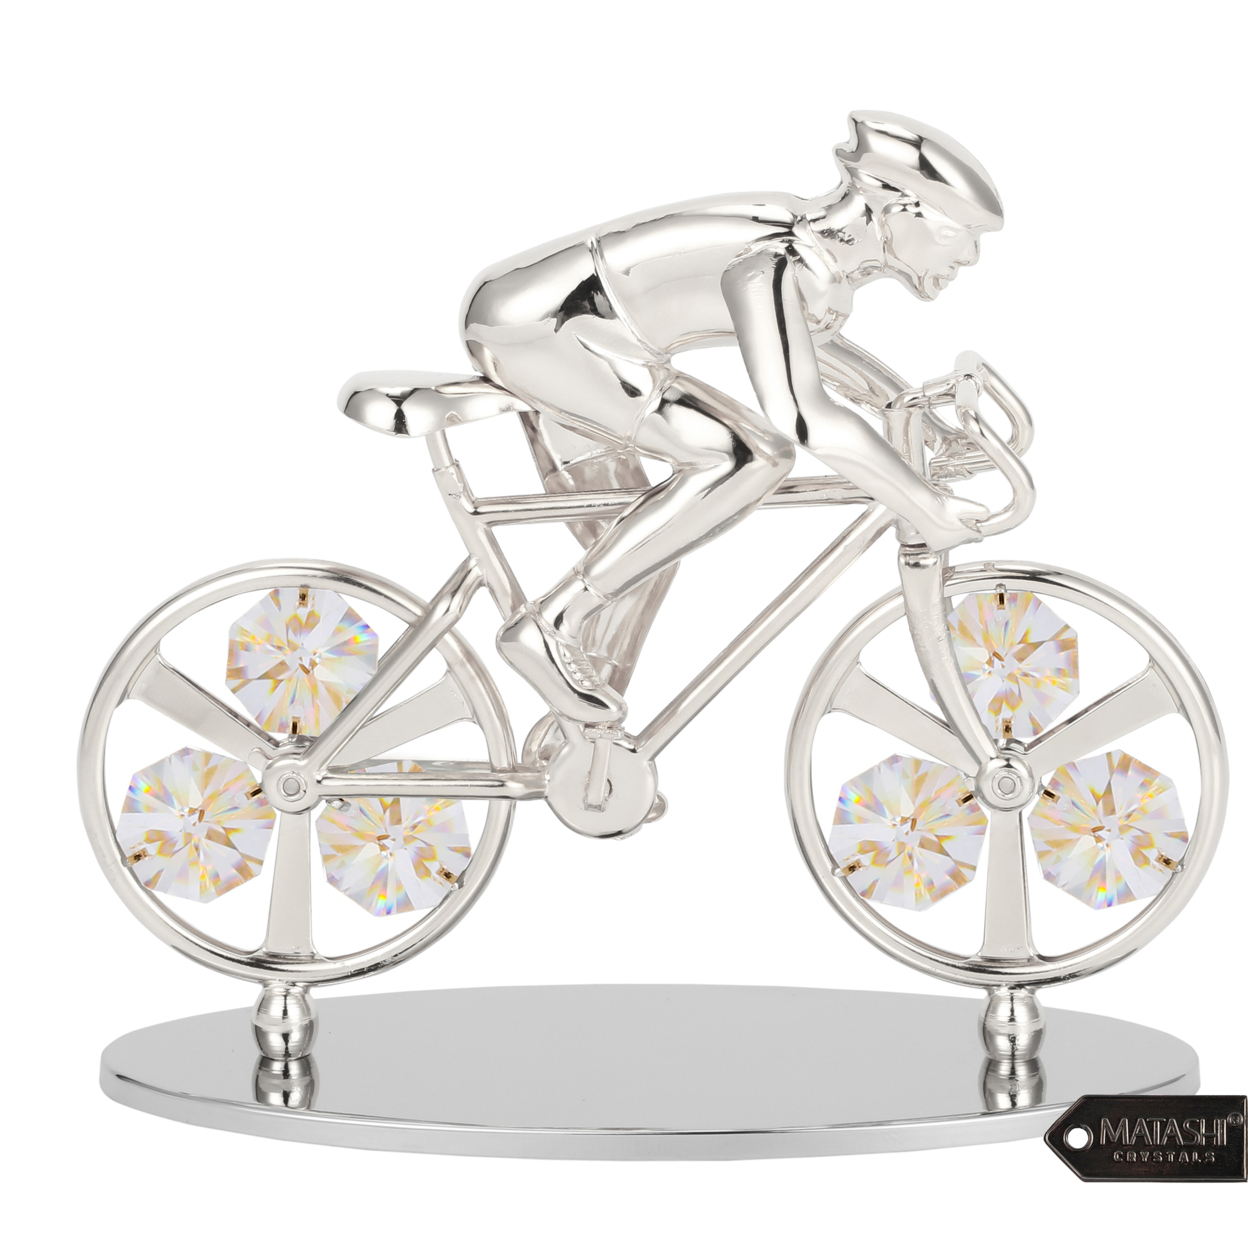 Matashi Silver Plated Cyclist On A Bicycle Figurine W/ Crystals, Tabletop Cyclist Ornament Gift For Sports Fan Desk Accessories Trophy